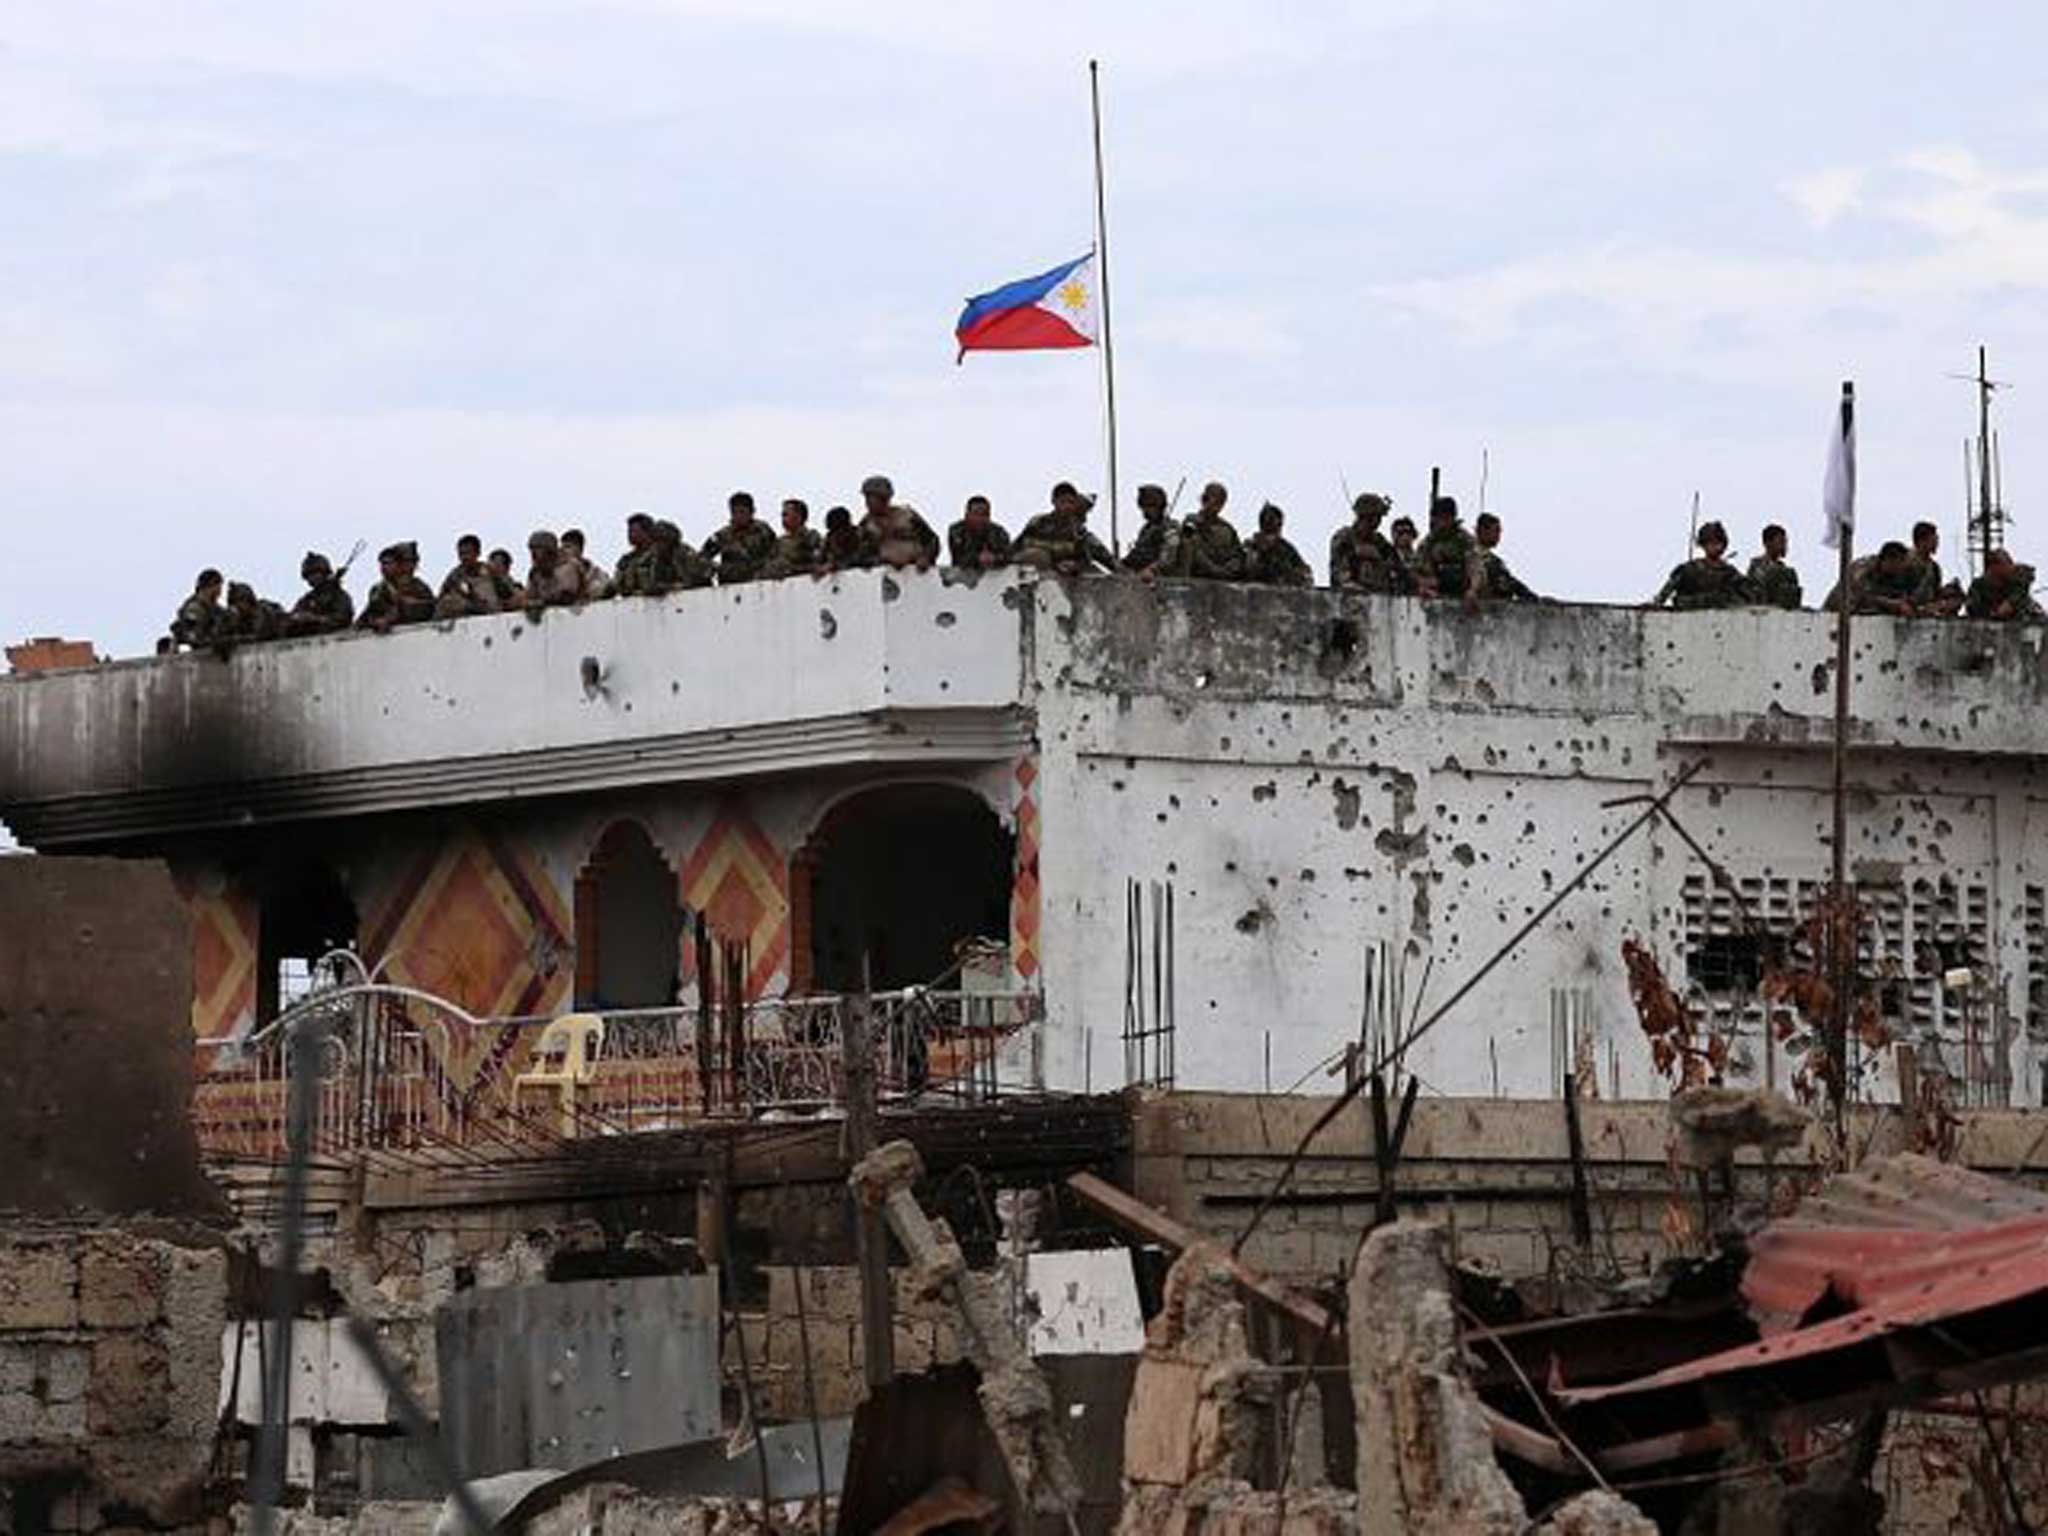 The flag of the Philippines flies at half-mast while soldiers secure the site controlled by rebels in the residential village in Zamboanga city, southern Philippines